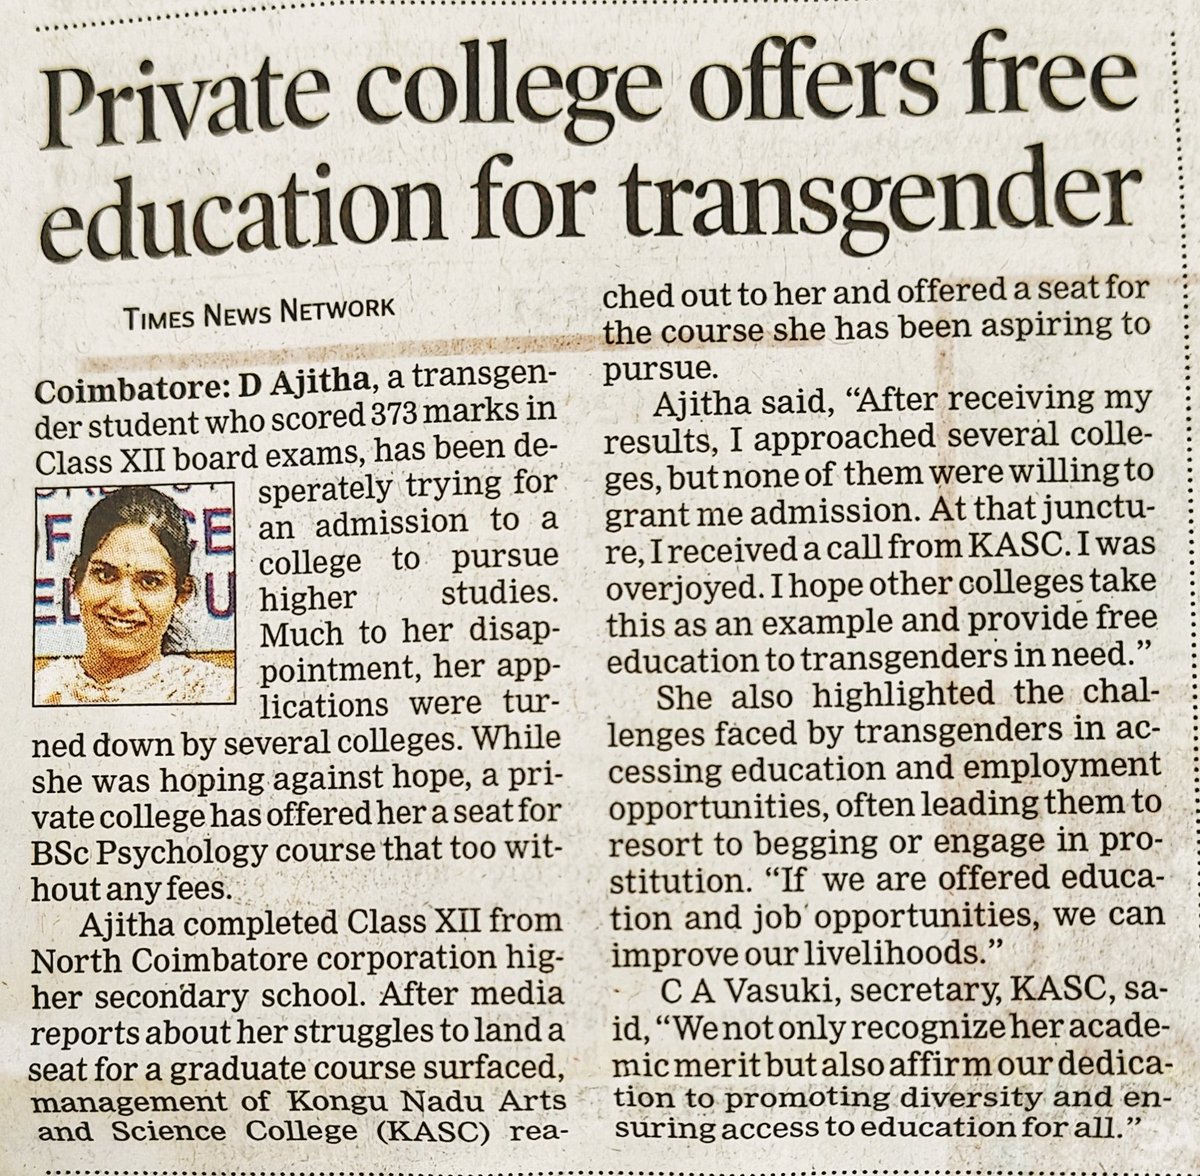 Kudos & our Salute to the Coimbatore District Collector, Coimbatore City Police Commissioner & Kongu Nadu College for coming forward to help & support a Transperson for pursuing her higher studies after completing her 12th standard from Coimbatore. @CollectorCbe @policecbecity